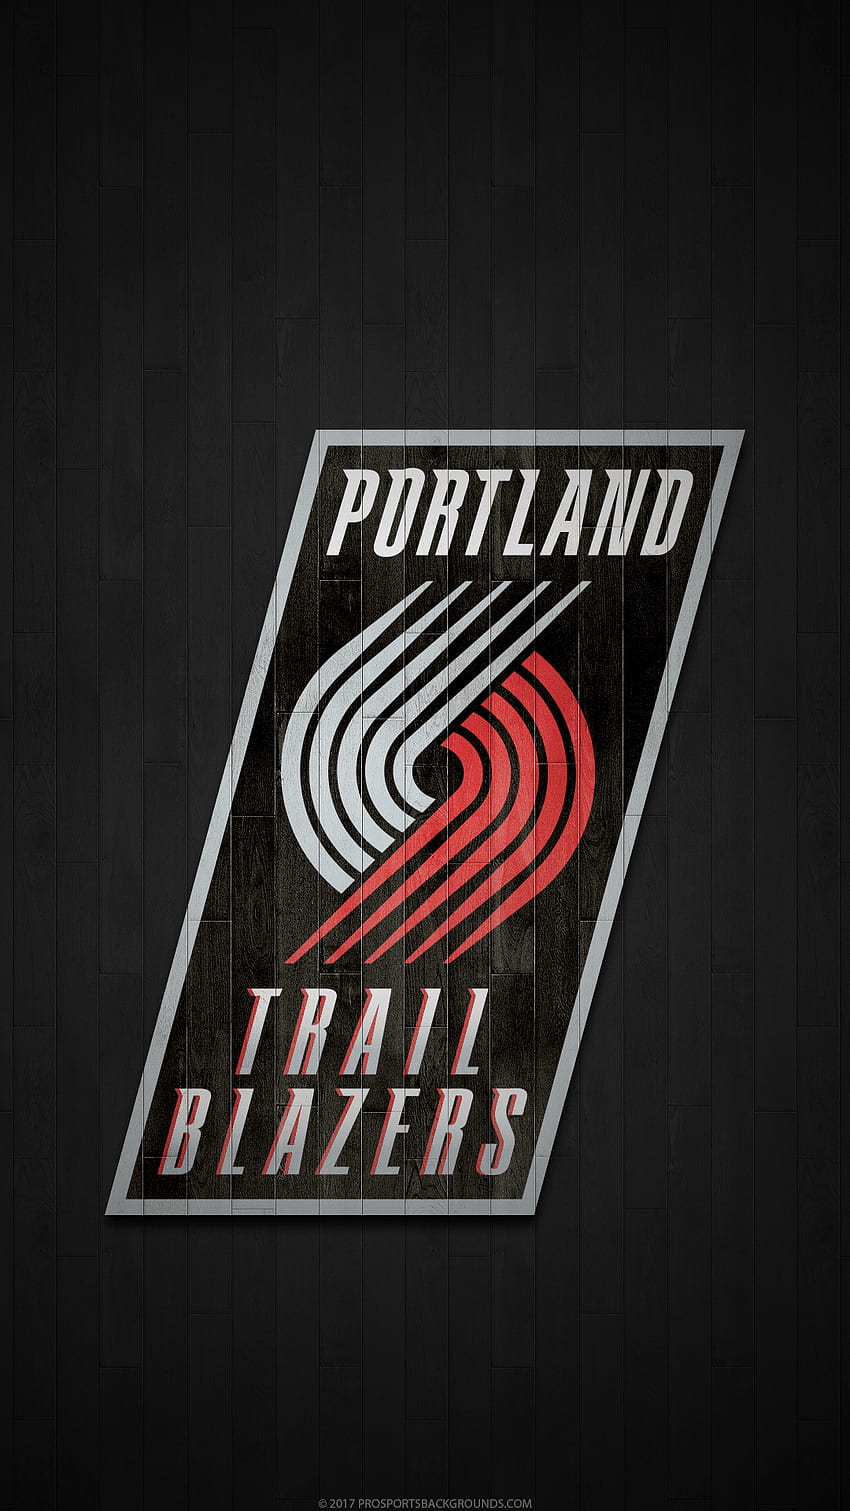 Portland Trail Blazers - PC. iPhone. Android wallpaper ponsel HD